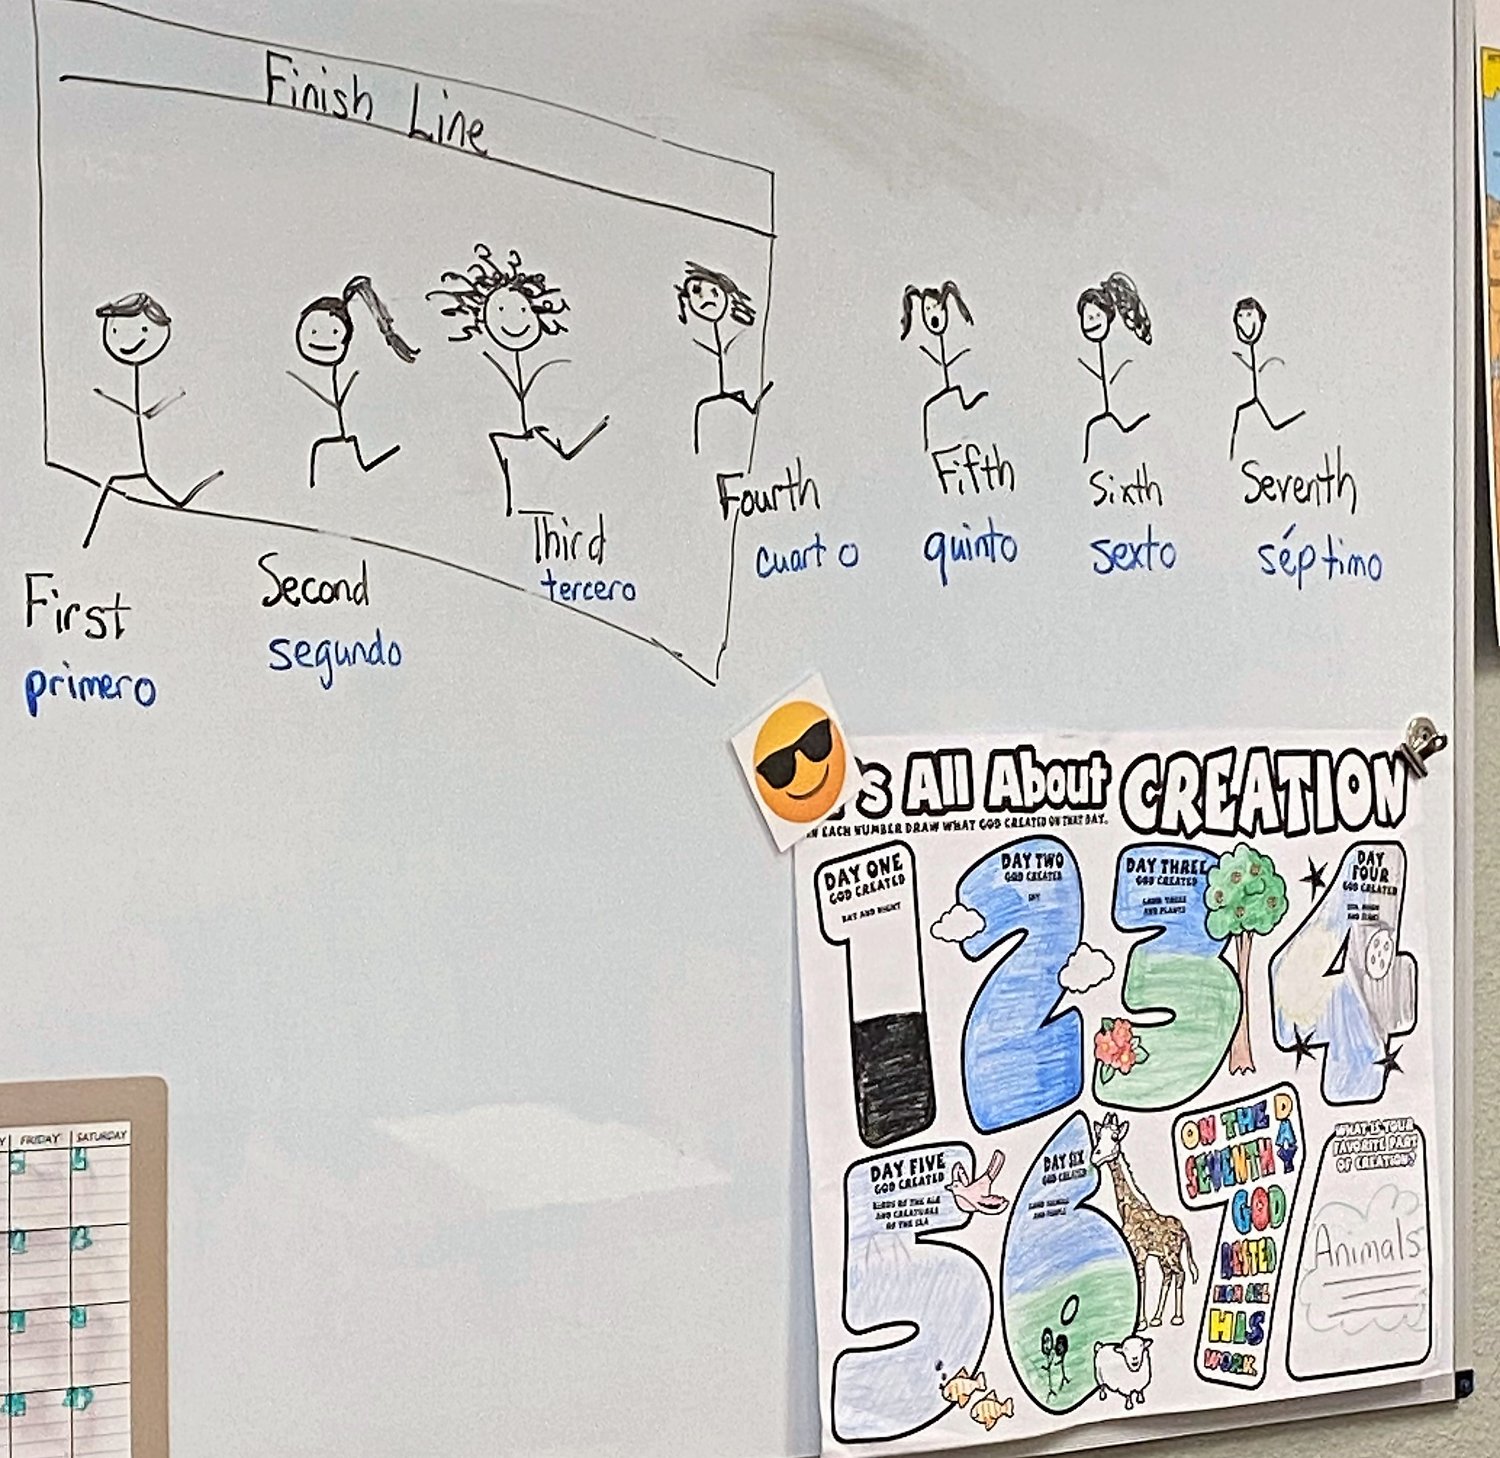 Biblical creation was included in the back-to-school ESL class at Cross Community Church for Spanish-speaking kindergarteners through fifth graders in the majority Hispanic Eastex-Jensen community of Houston.